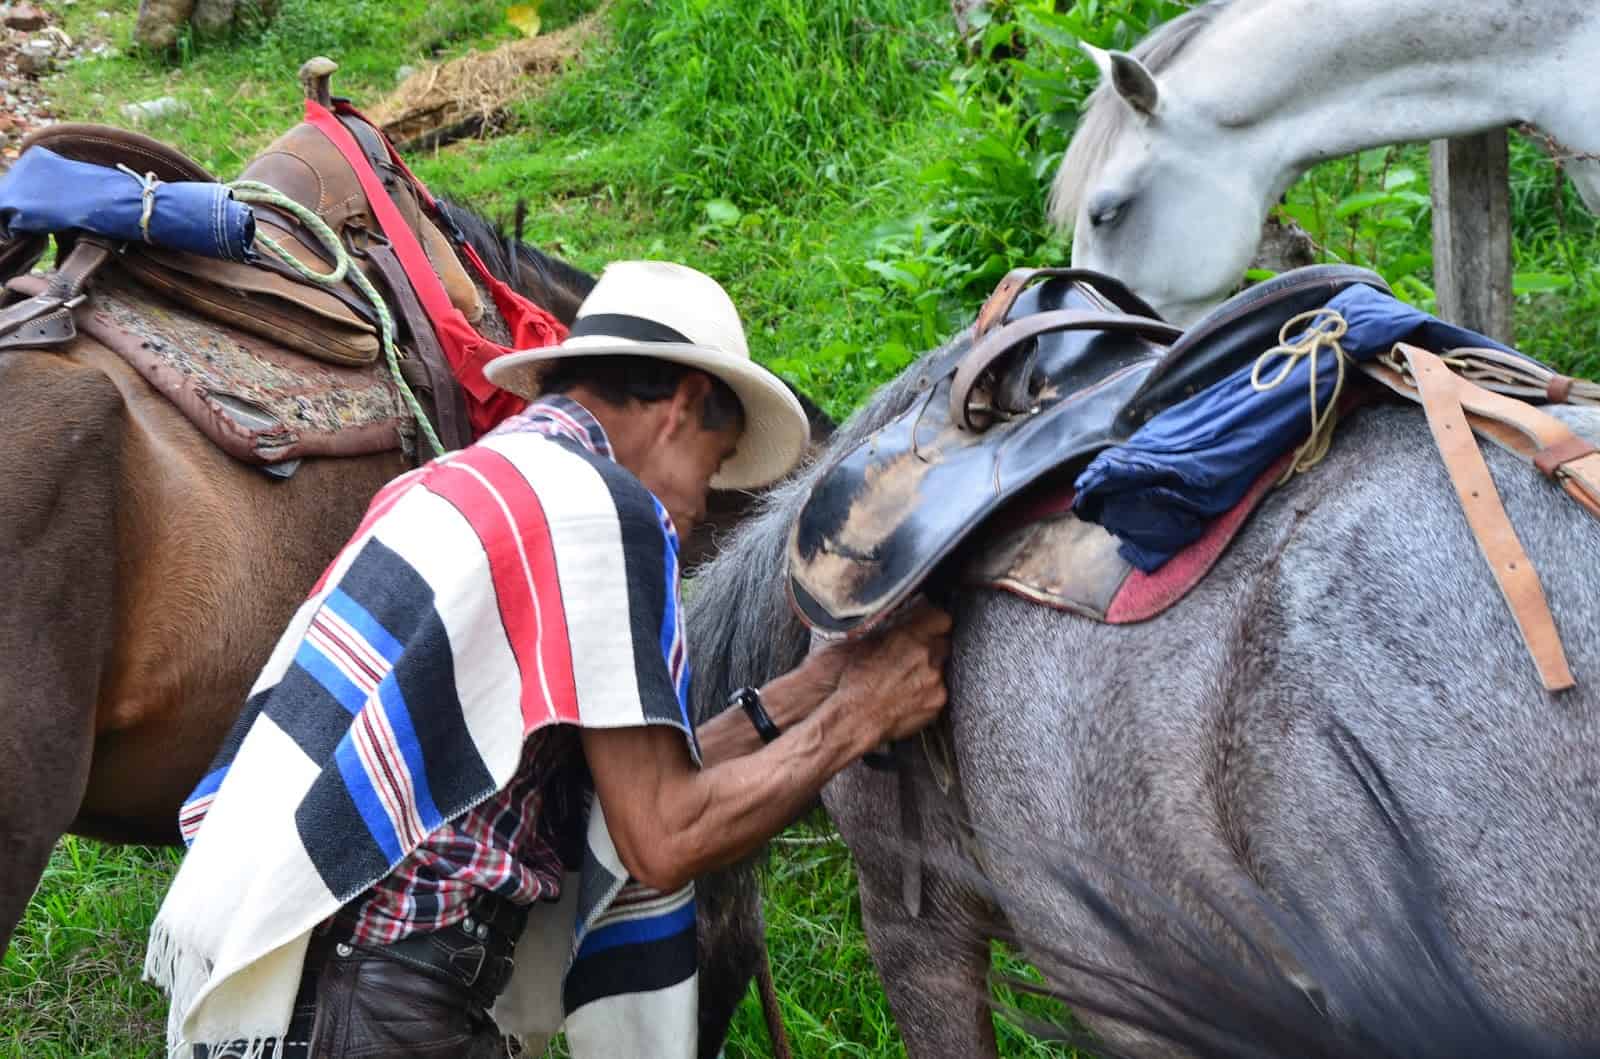 Getting the horses ready in Salento, Quindío, Colombia